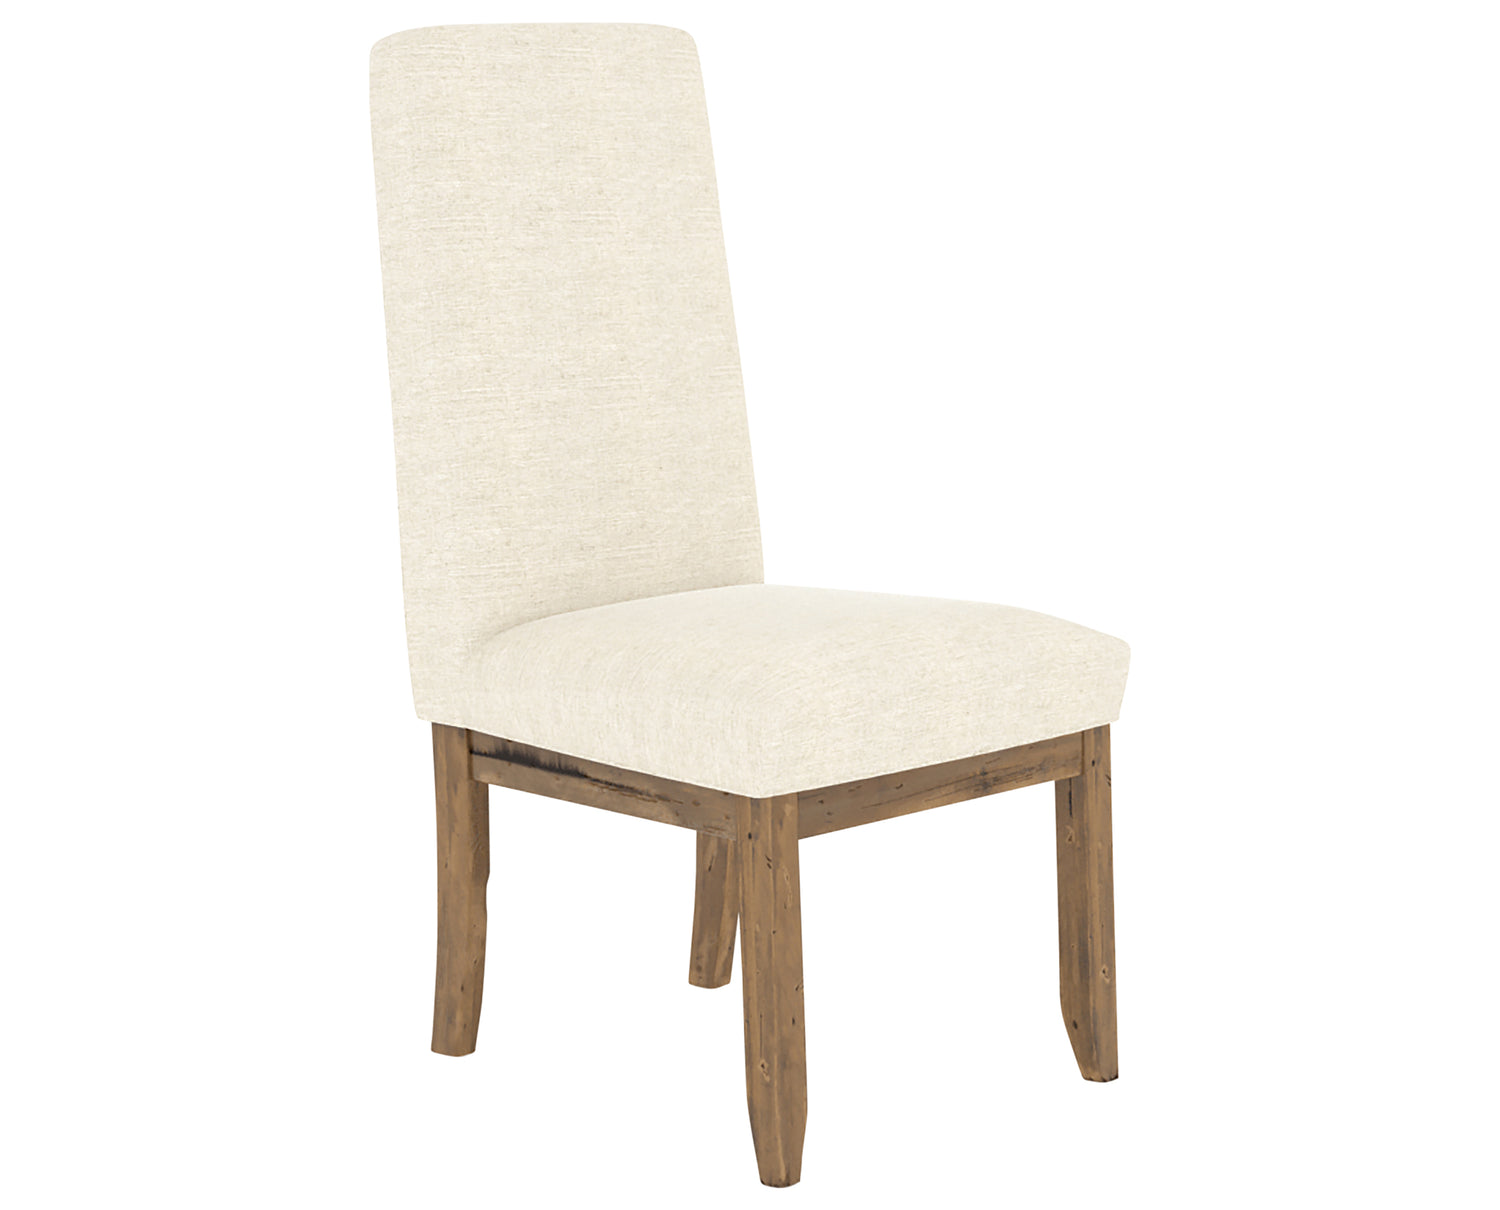 Oak Washed and Fabric TW | Canadel Champlain Dining Chair 0138 | Valley Ridge Furniture